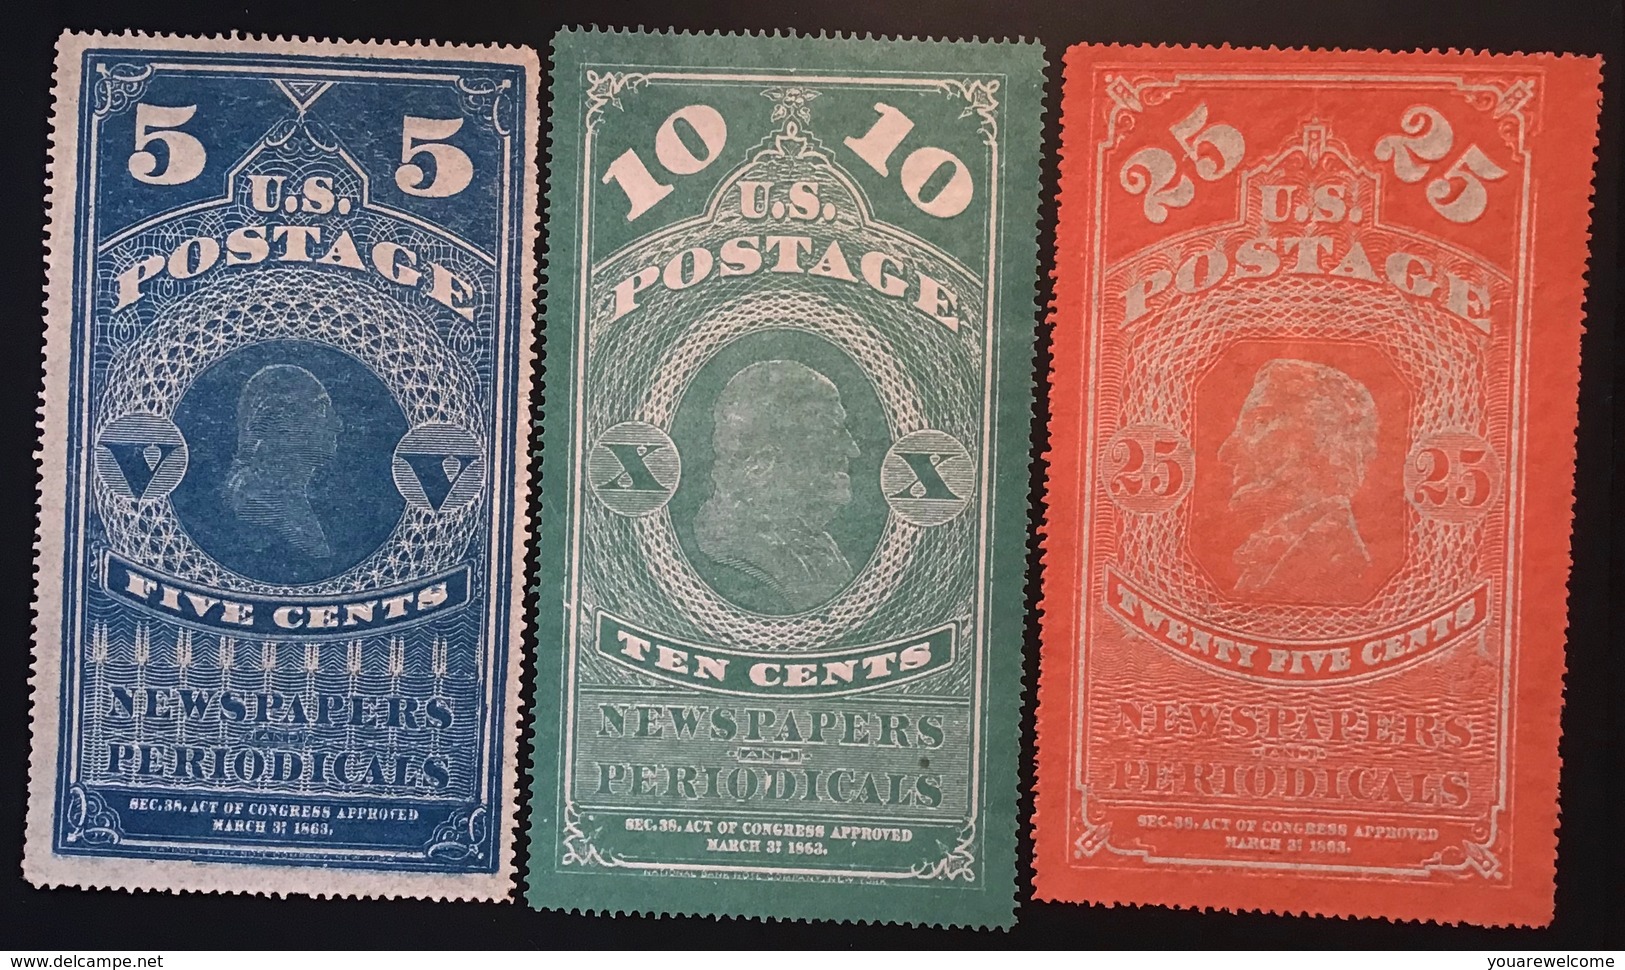 1865 Newspaper And Periodical Stamps 19th C. FORGERY Scott PR 1-3 (*) (US USA FAUX FALSCH Timbres Pour Journaux - Newspaper & Periodical